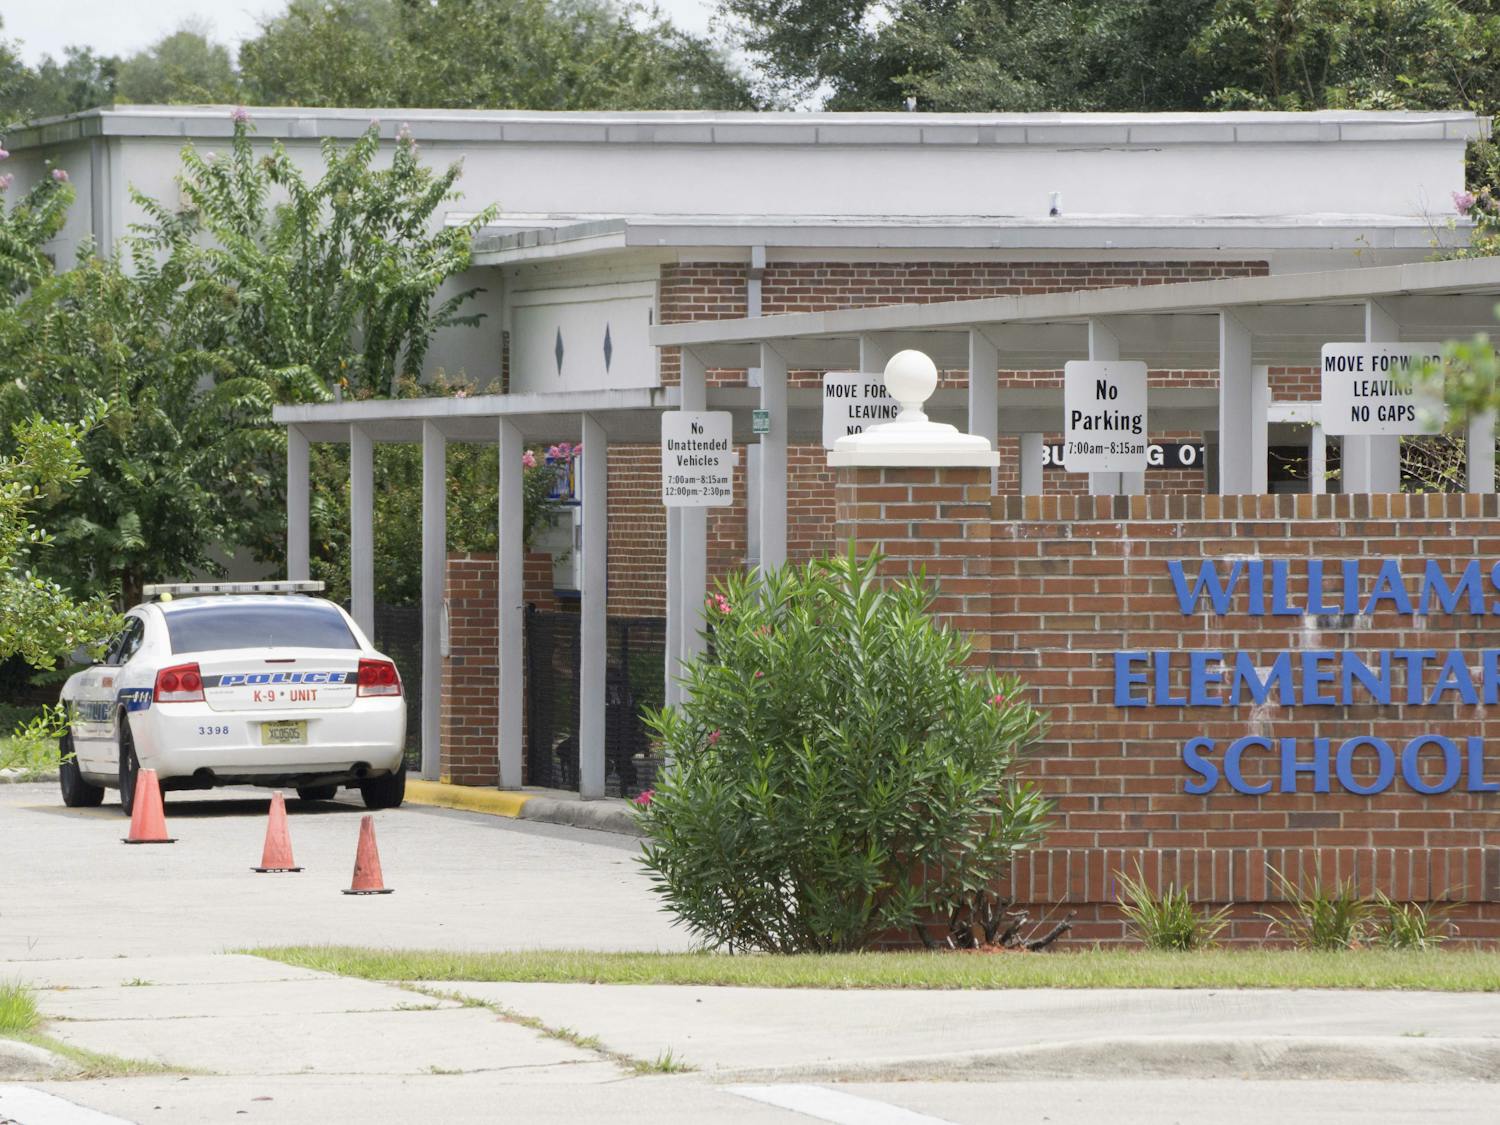 An Alachua County Sheriff's Office police car is stationed outside Joseph Williams Elementary School Aug. 28, 2015.